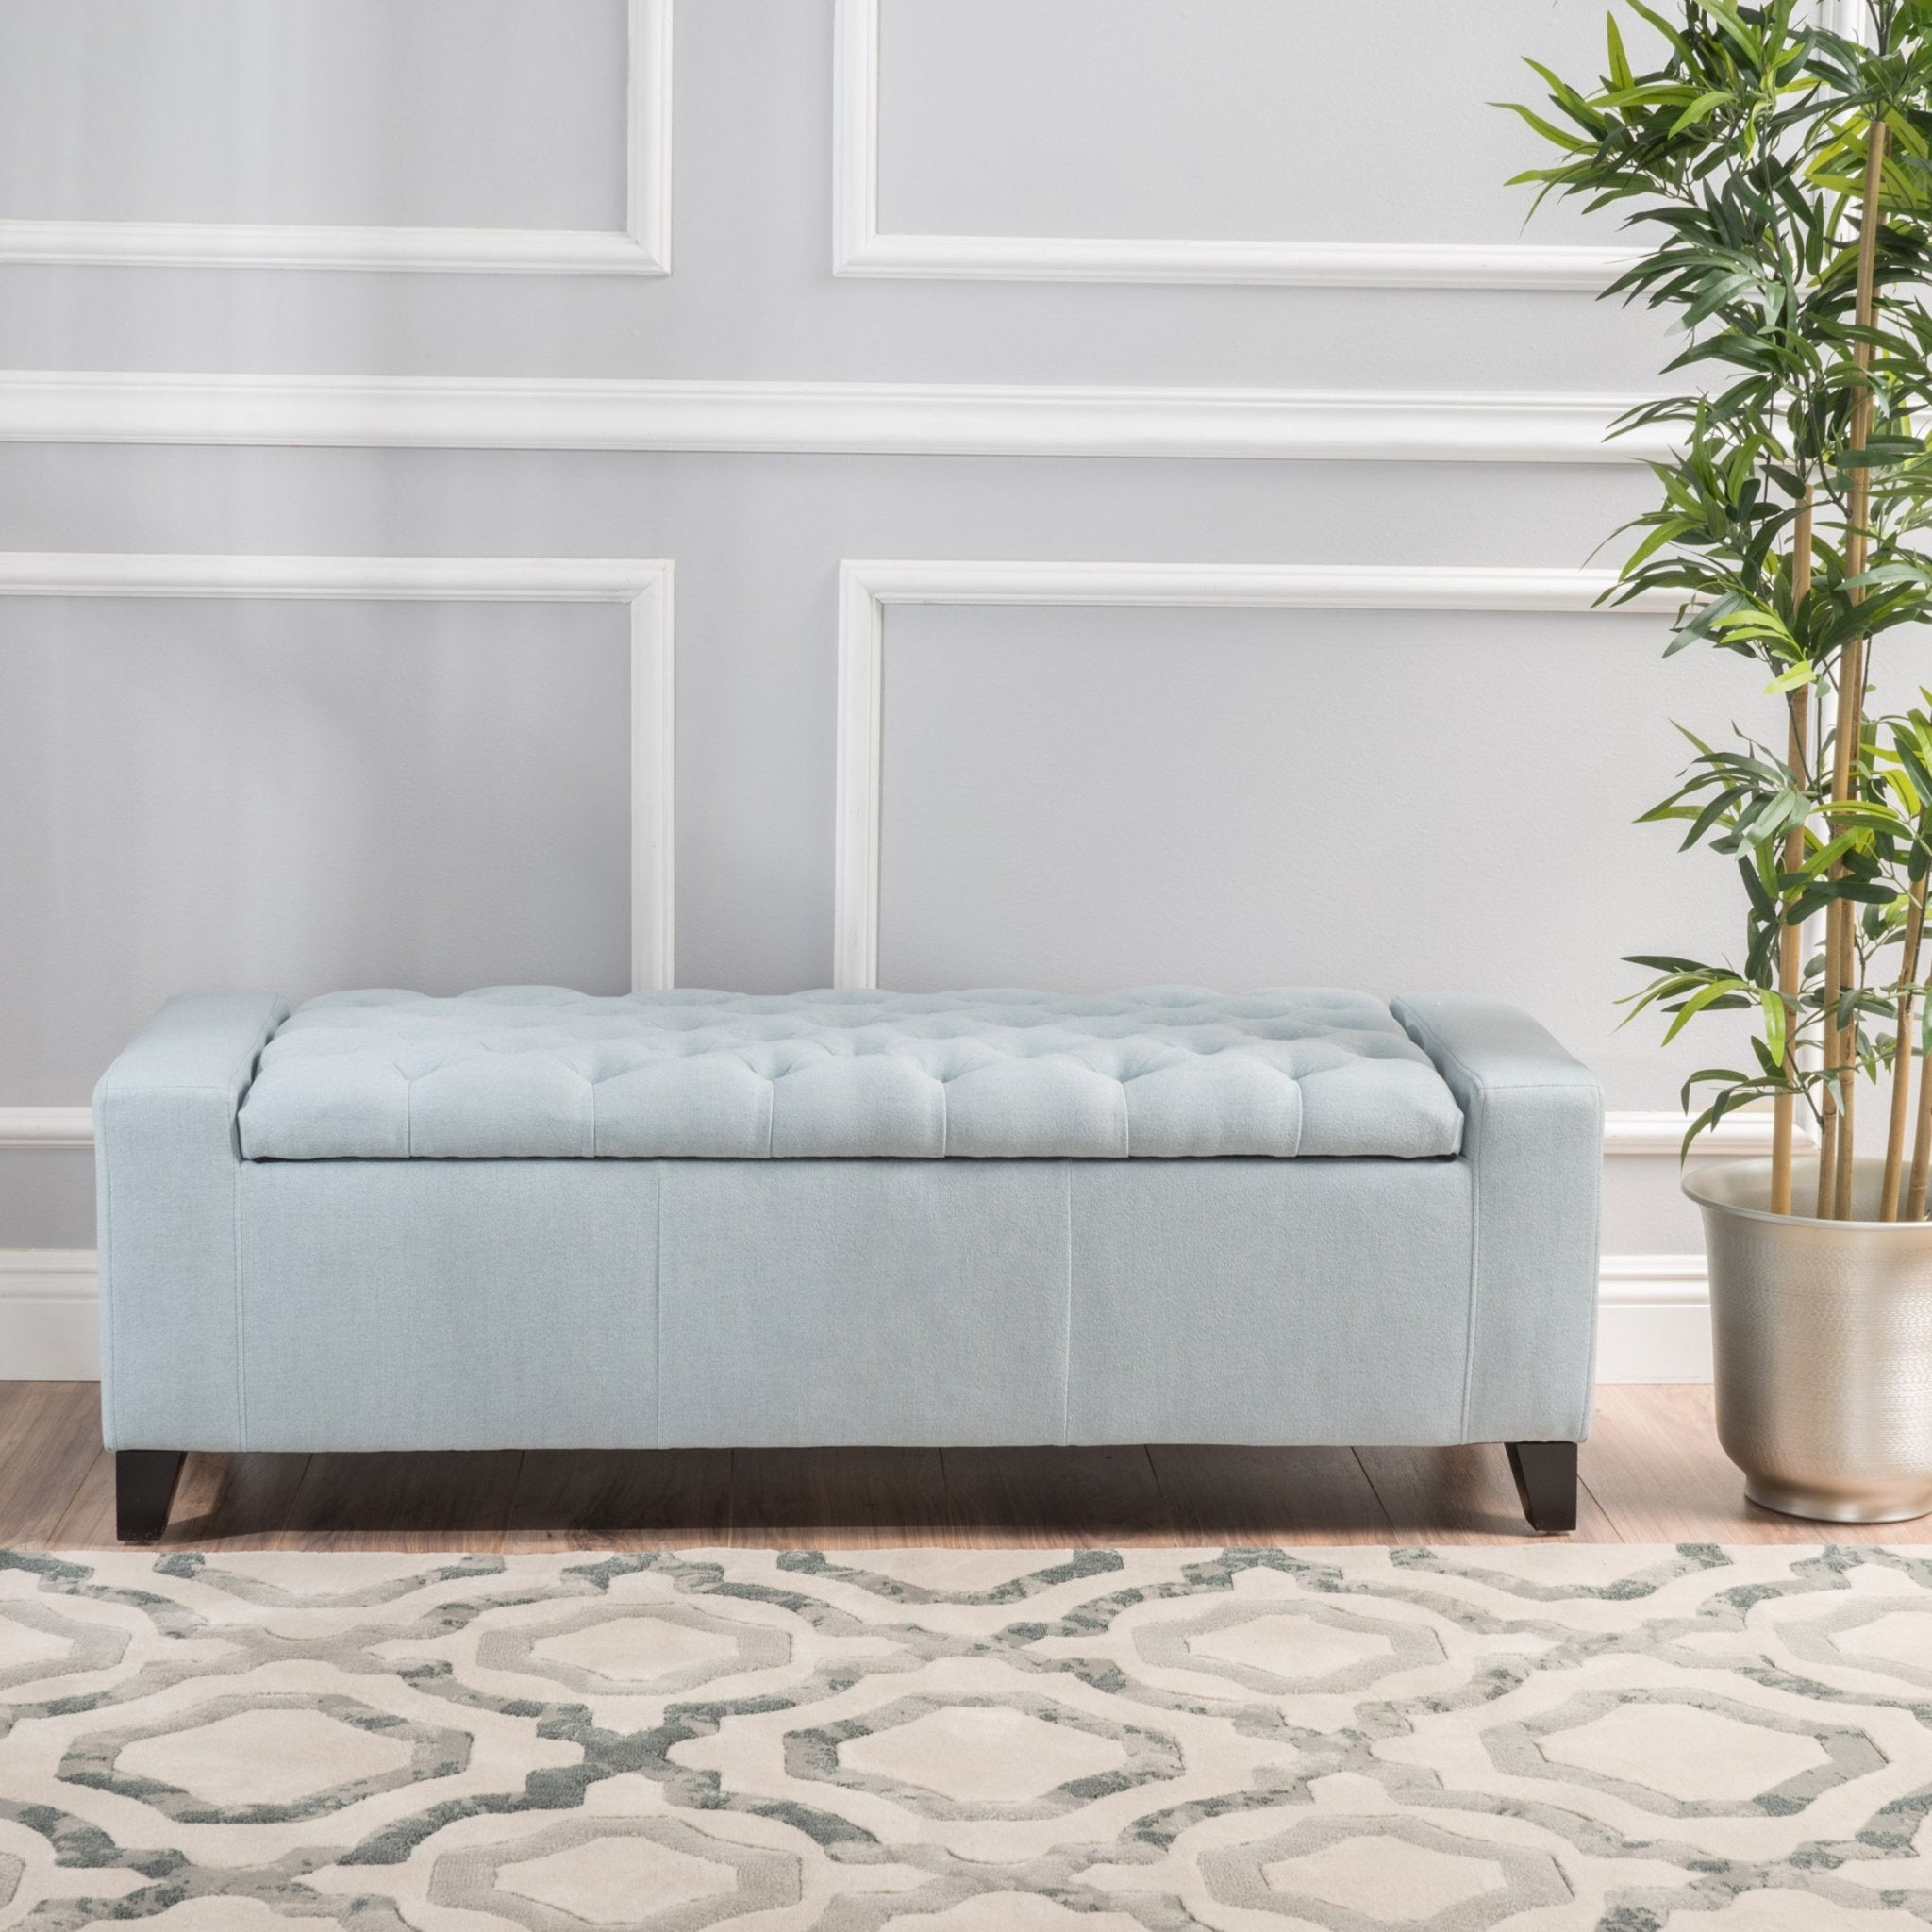 Synchronize Upholstered Storage Bench with Button Tufted Diamond Stitch